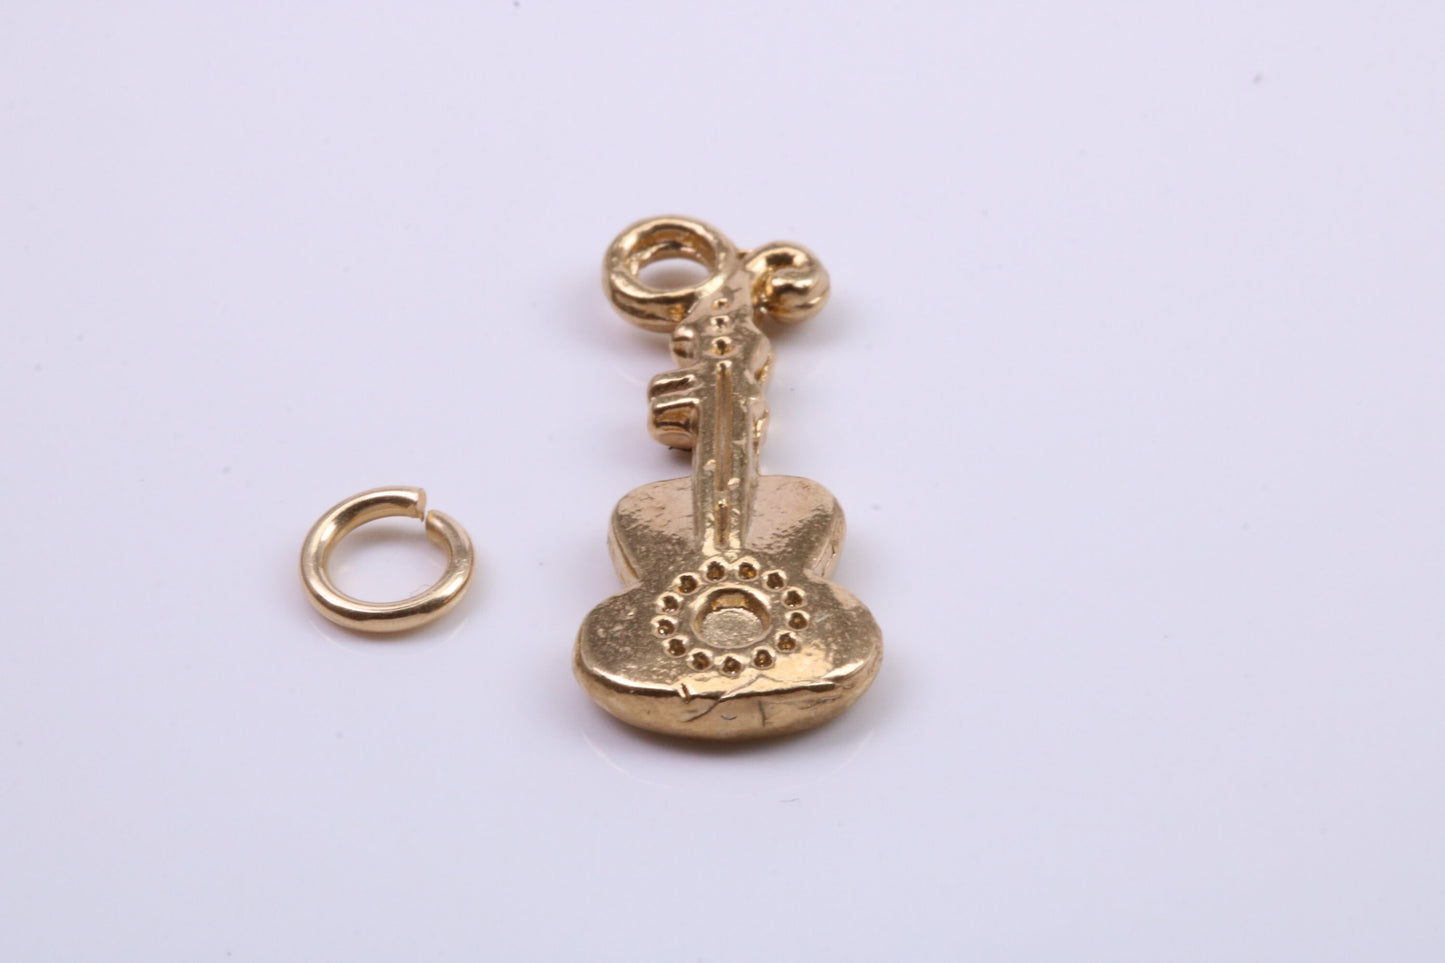 Guitar Charm, Traditional Charm, Made from Solid 9ct Yellow Gold, British Hallmarked, Complete with Attachment Link